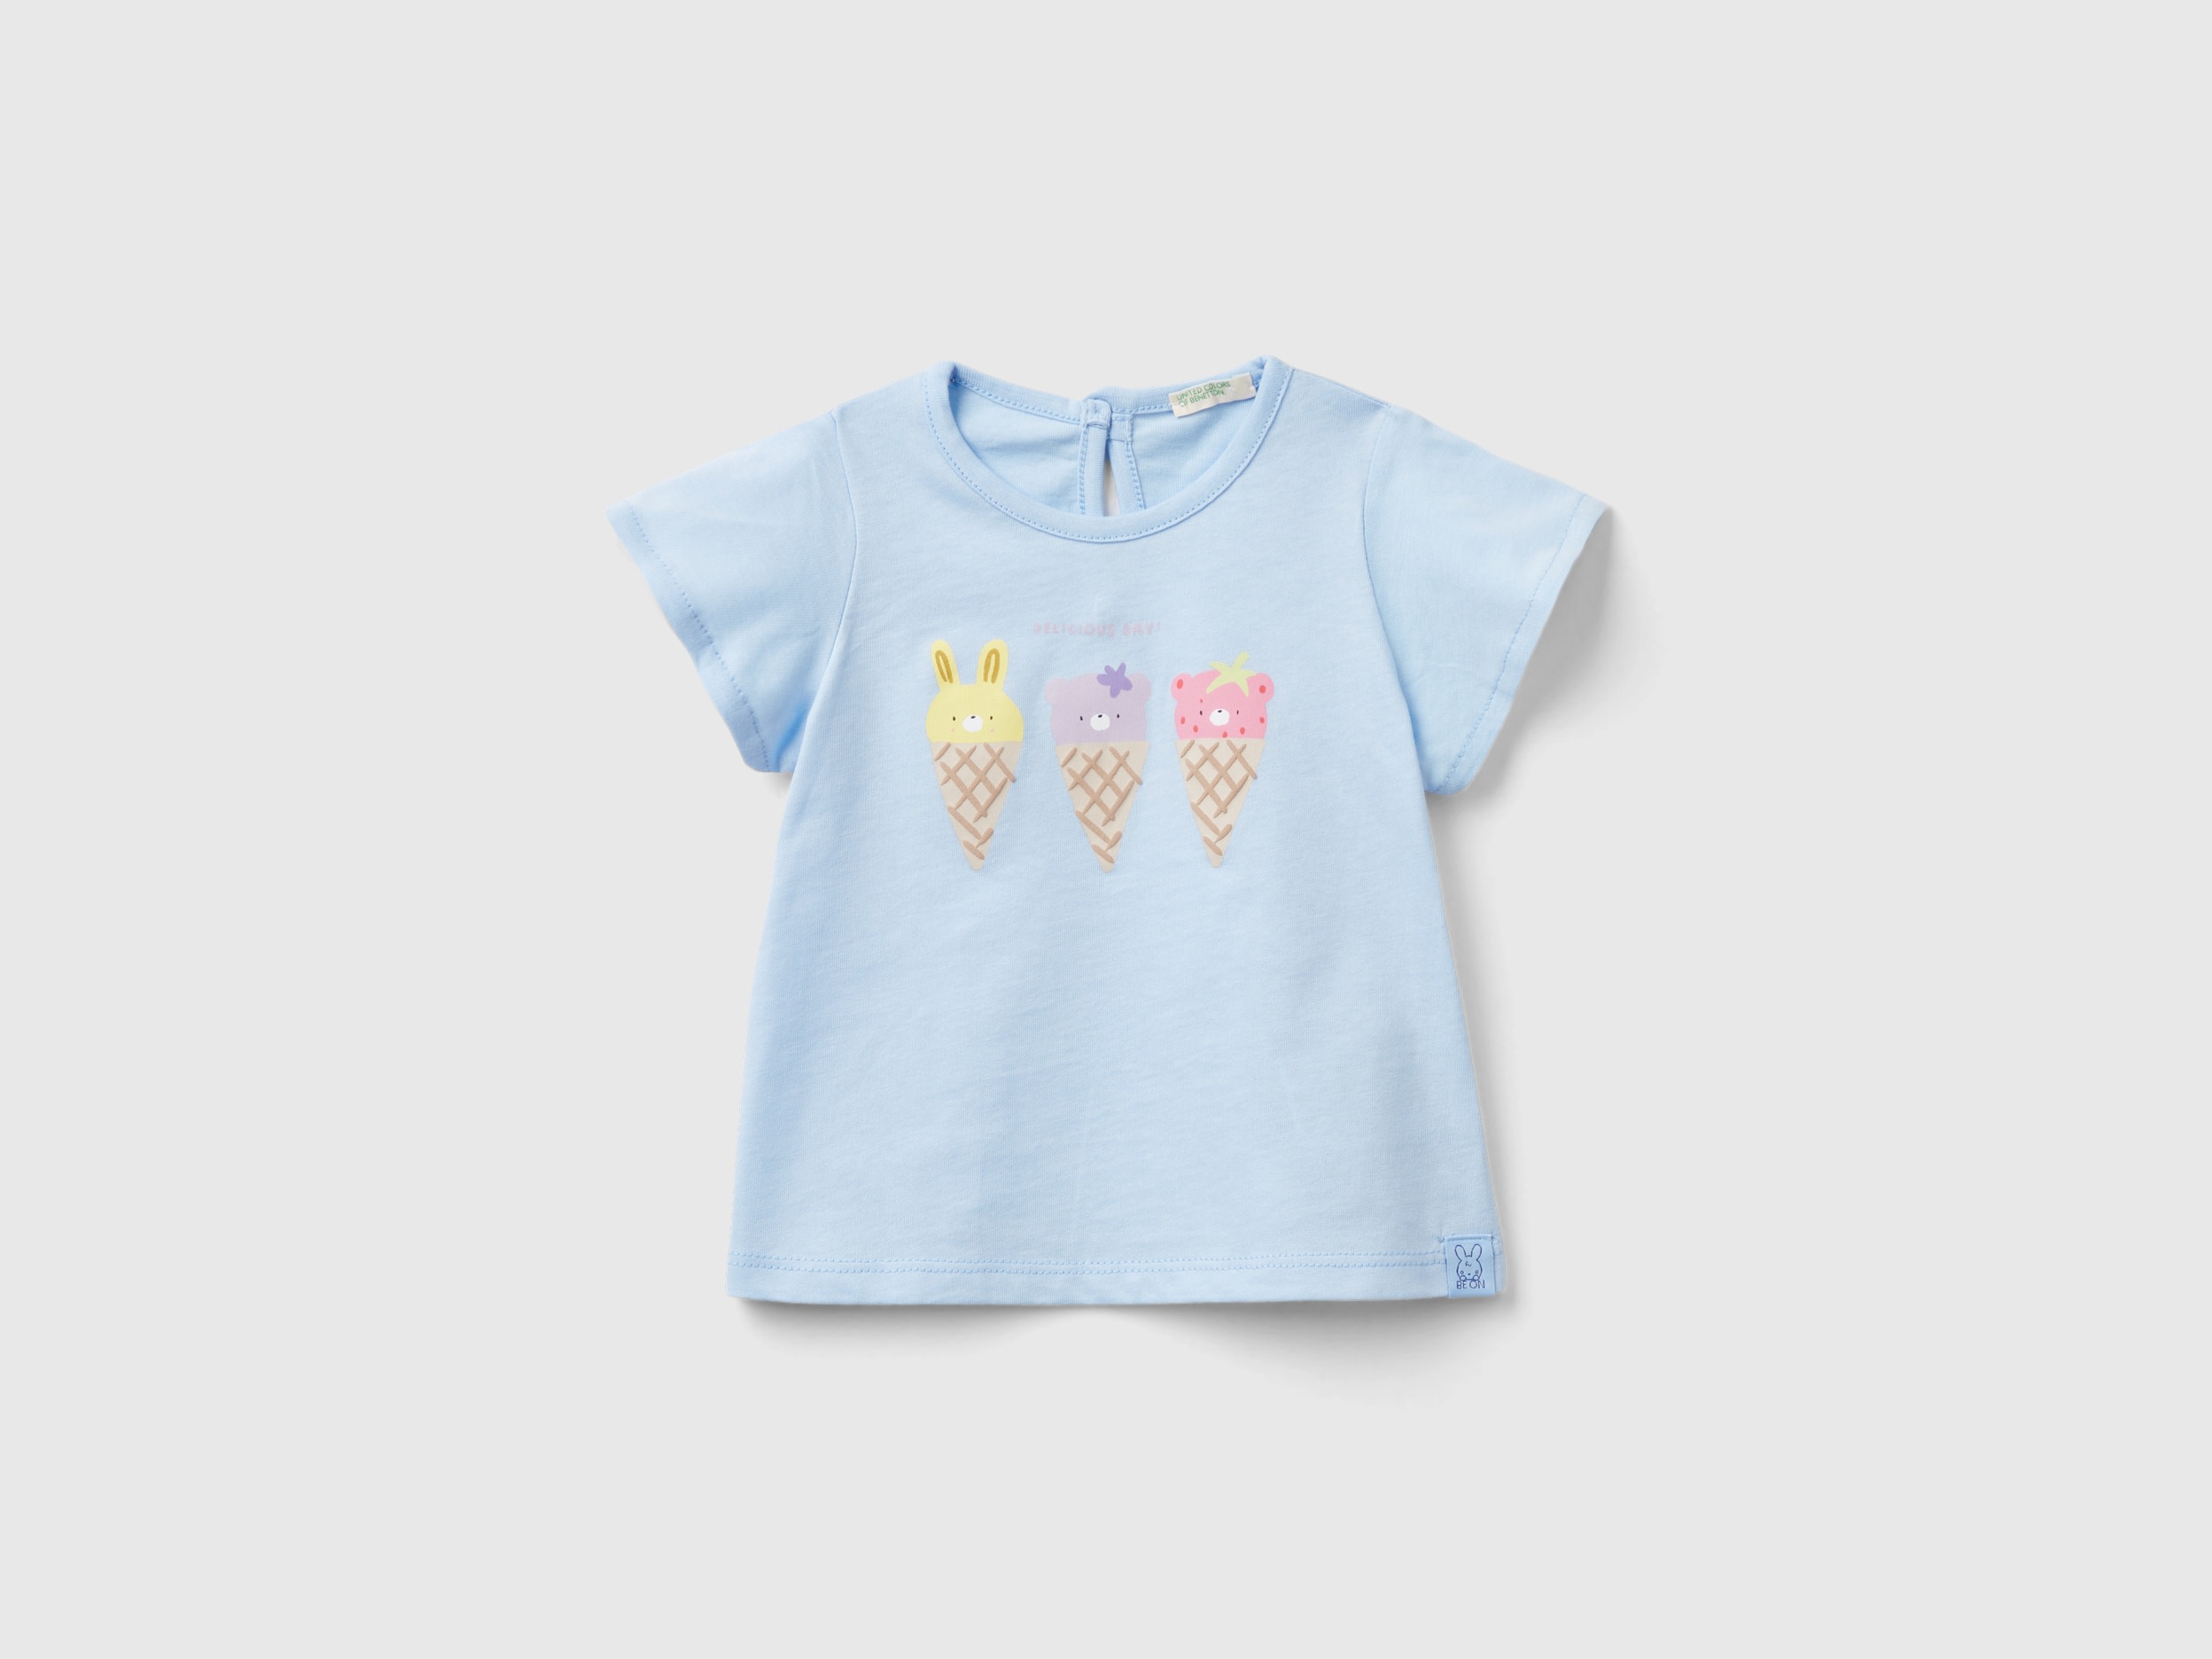 Image of Benetton, T-shirt In Pure Organic Cotton, size 82, Sky Blue, Kids